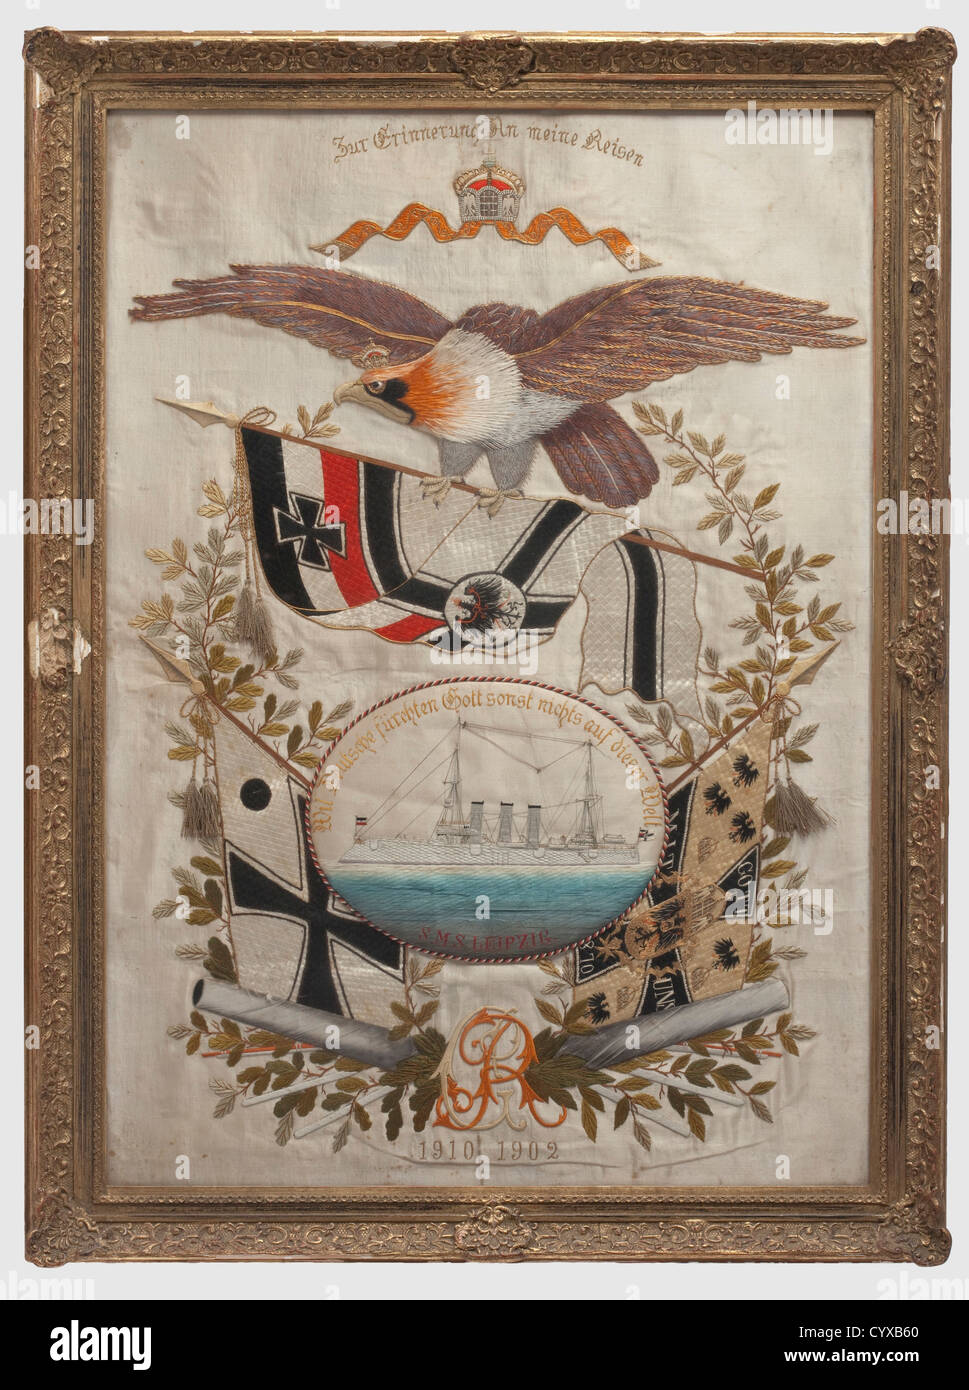 SMS Leipzig - three silk embroidered pictures,in commemoration of the time of service in East Asia 1902 - 1910 Elaborately embroidered crowned eagle with the Imperial war flag in its talons above a picture of the light cruiser Leipzig in an oval,surrounded by the inscription,(tr.)'We Germans fear God,but otherwise nothing else on earth' flanked by the imperial standard and rear admiralïs pennant ,above the monogram 'RG'(Richard Grimmel),and inscribed 'In memory of my time of service 1910 1912' In a contemporary,richly decorated,gilt plaster frame(dama,Additional-Rights-Clearences-Not Available Stock Photo